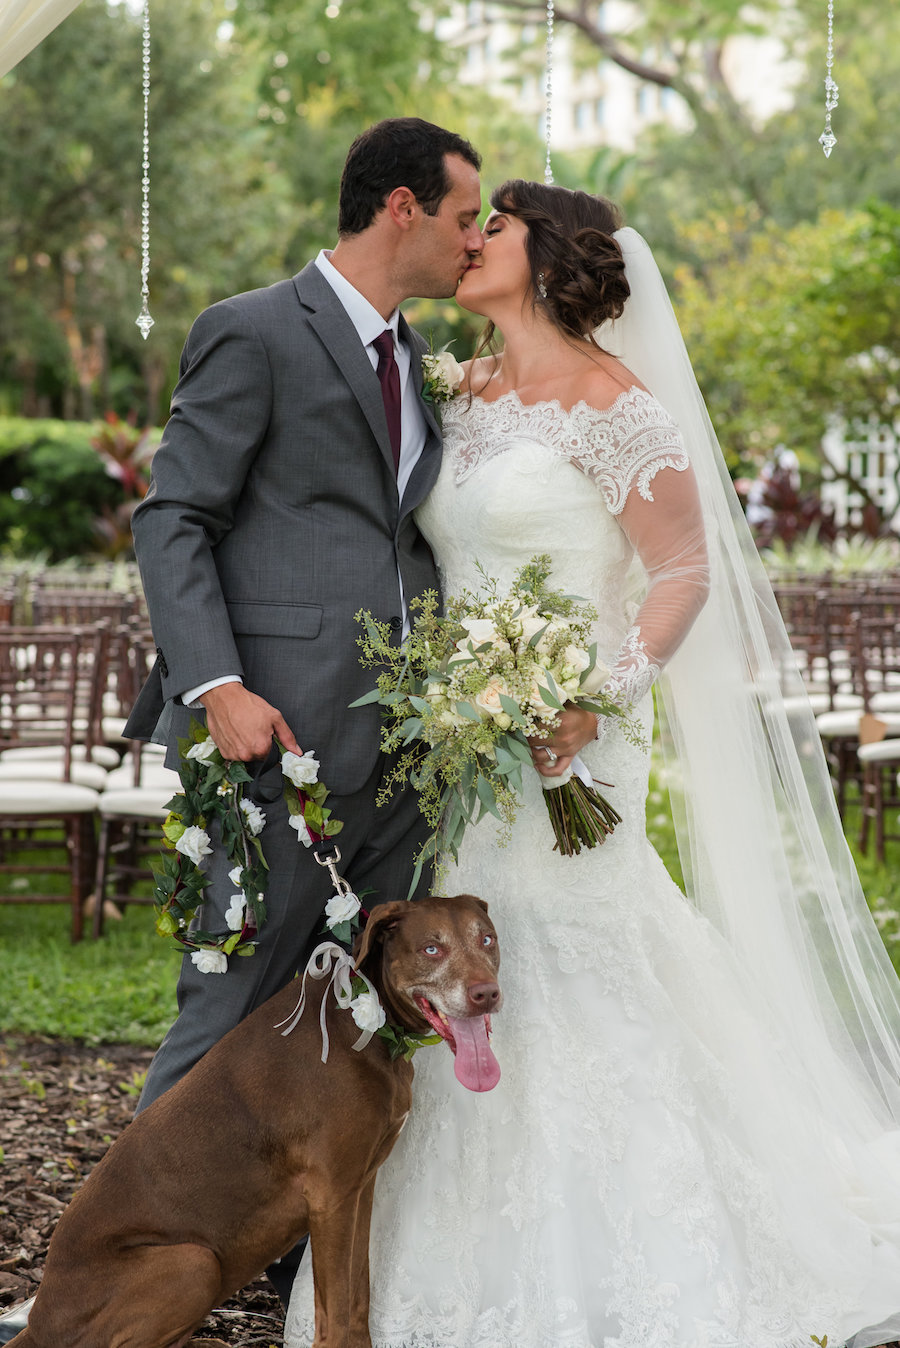 Outdoor Garden Grey and Bordeaux Wedding Ceremony Portrait with Lace Sweetheart Allure Dress and White and Greenery Bouquet with Dog of Honor with Floral Garland Leash | Tampa Bay Florida Wedding Photographer Caroline & Evan Photography